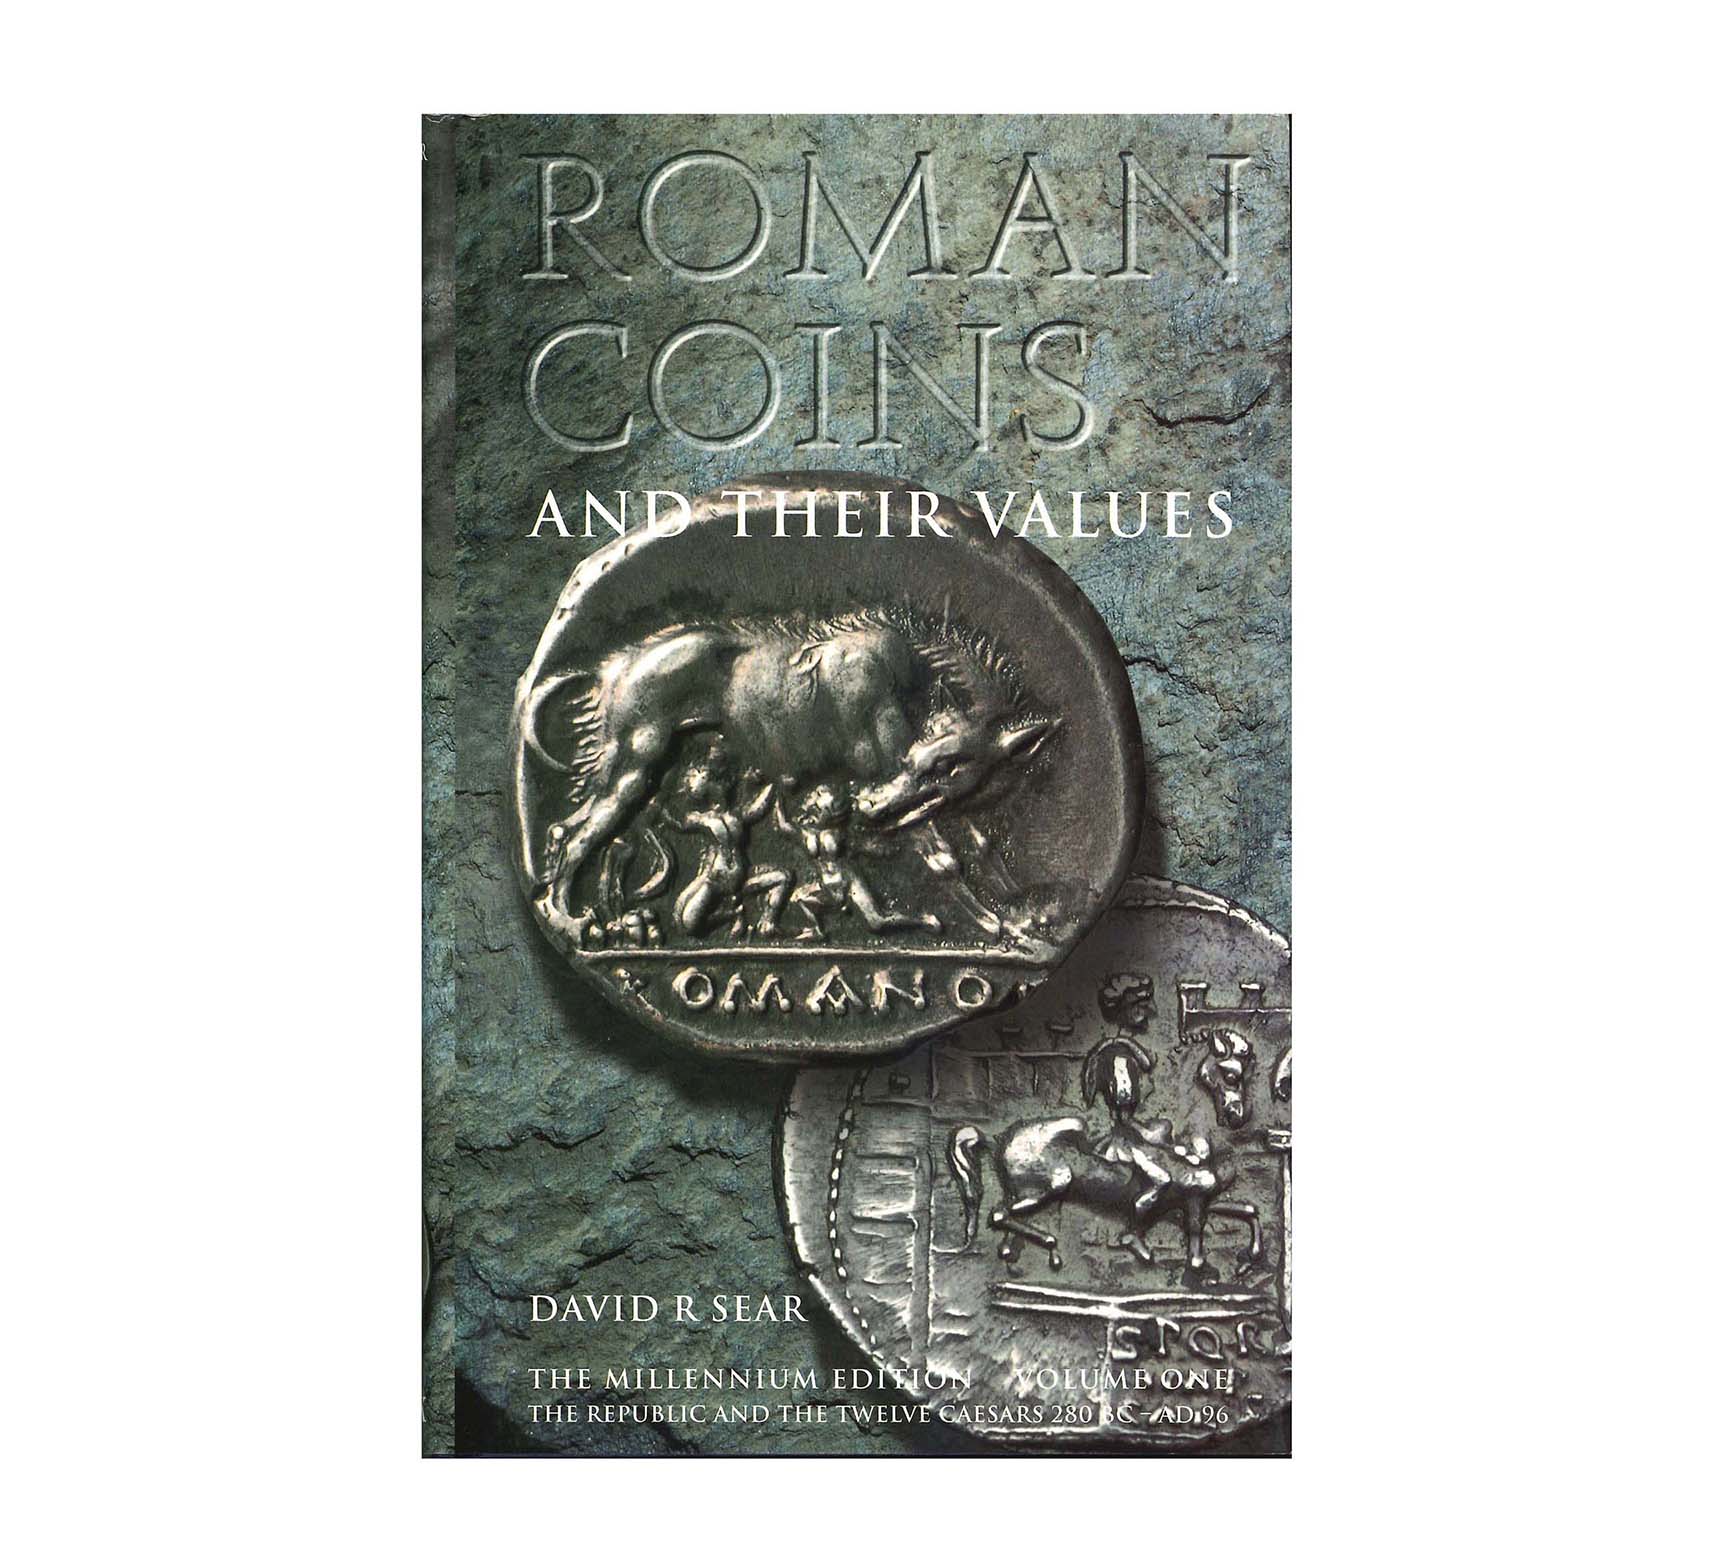 Roman Coins and Their Values, Volume I: The Republic and the Twelve Caesars